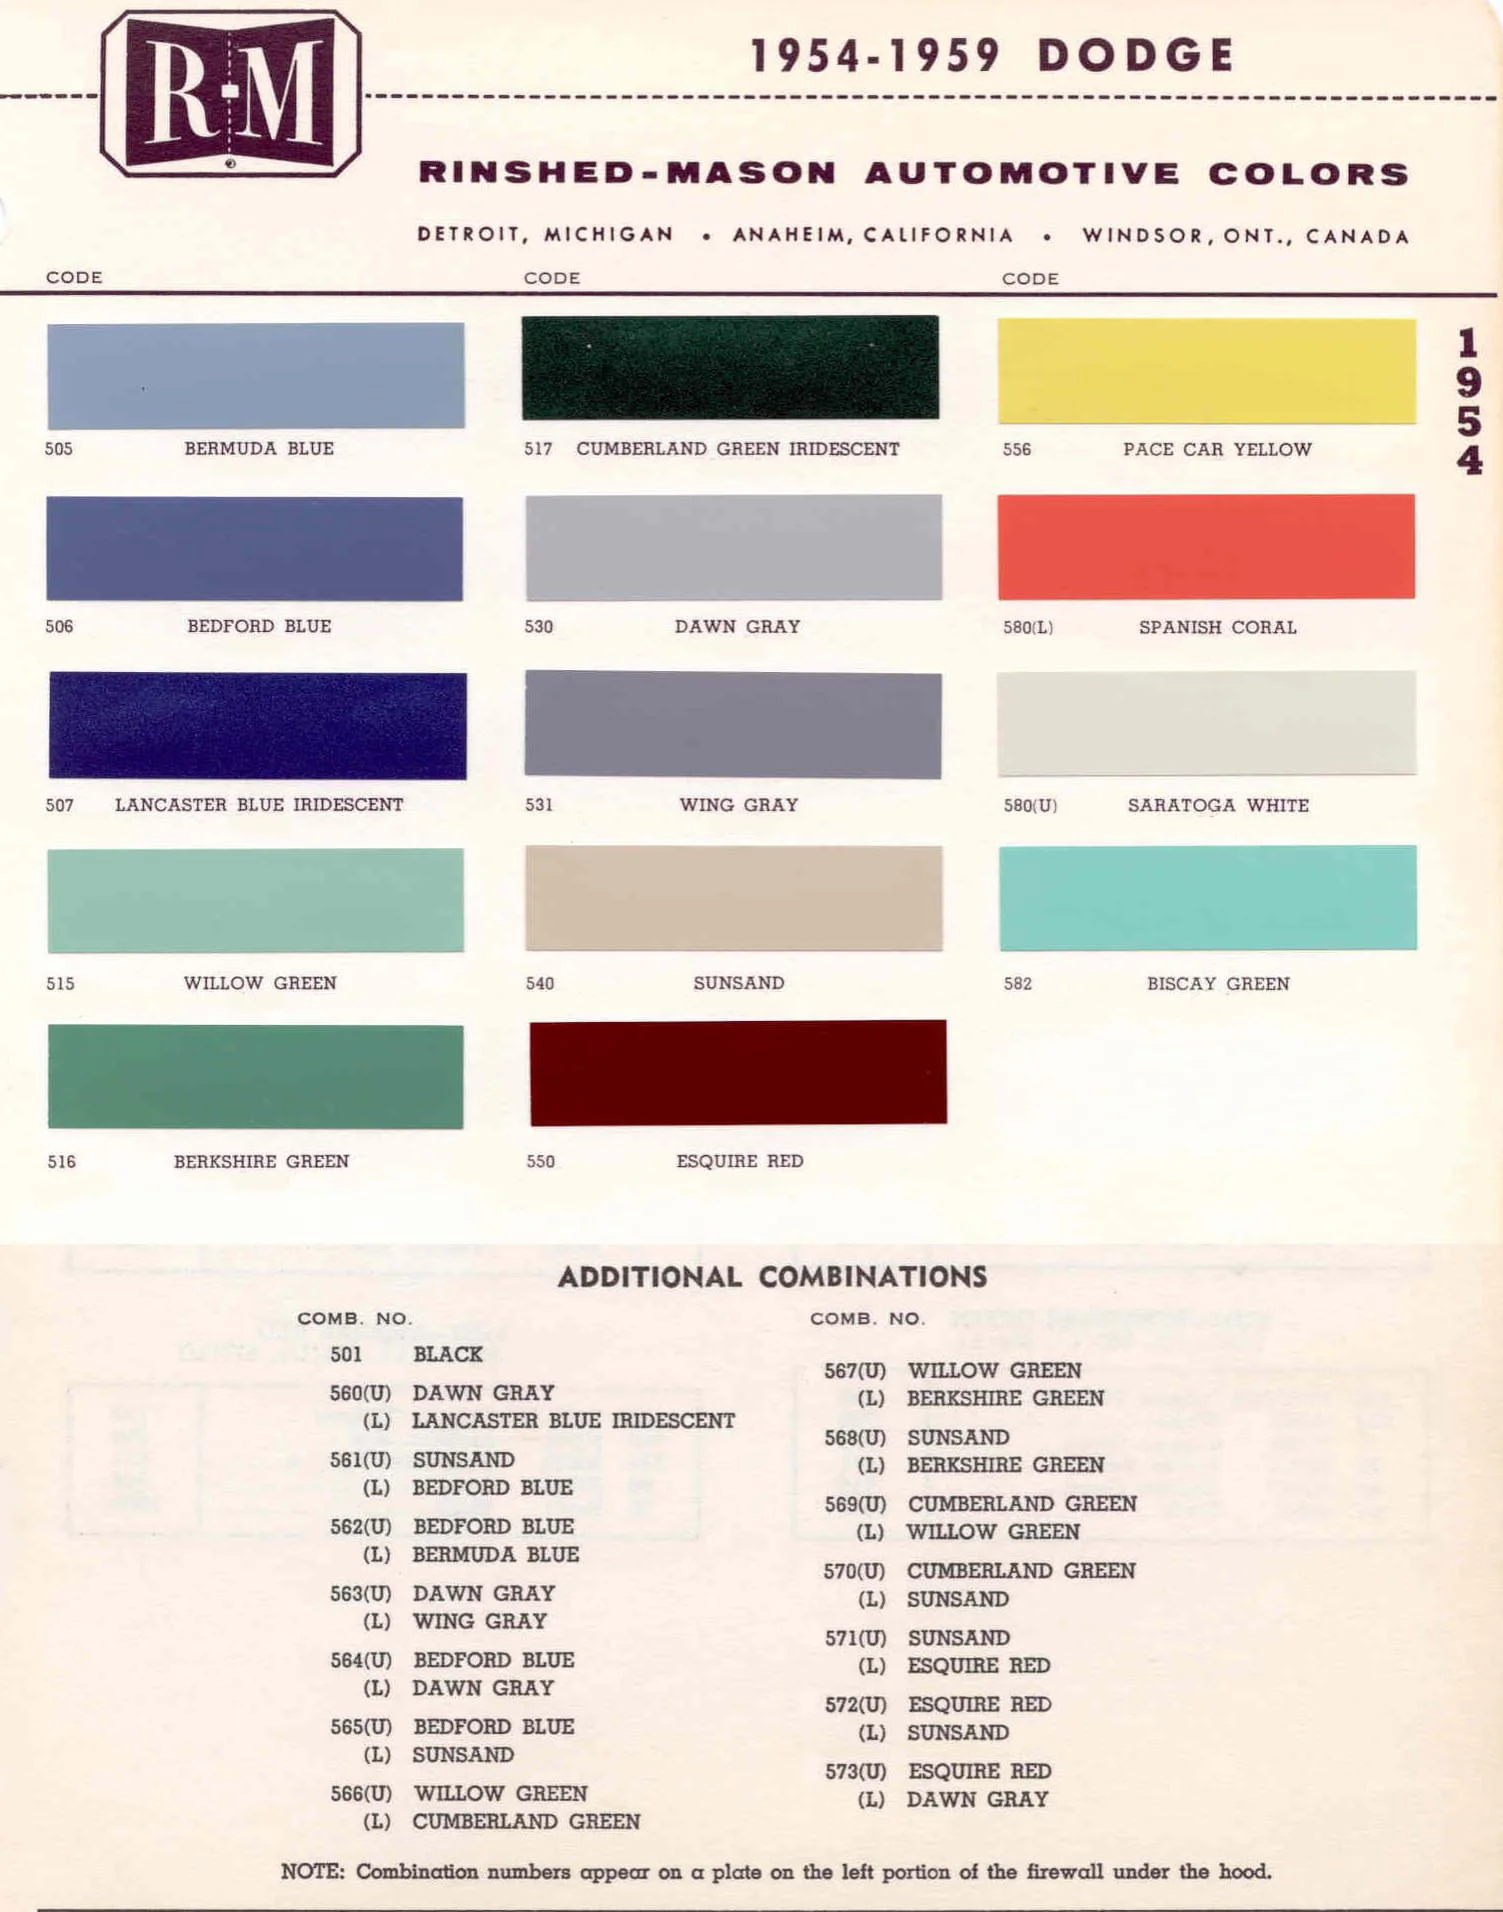 Summary Of Colors used on all Dodge Vehicles in 1954